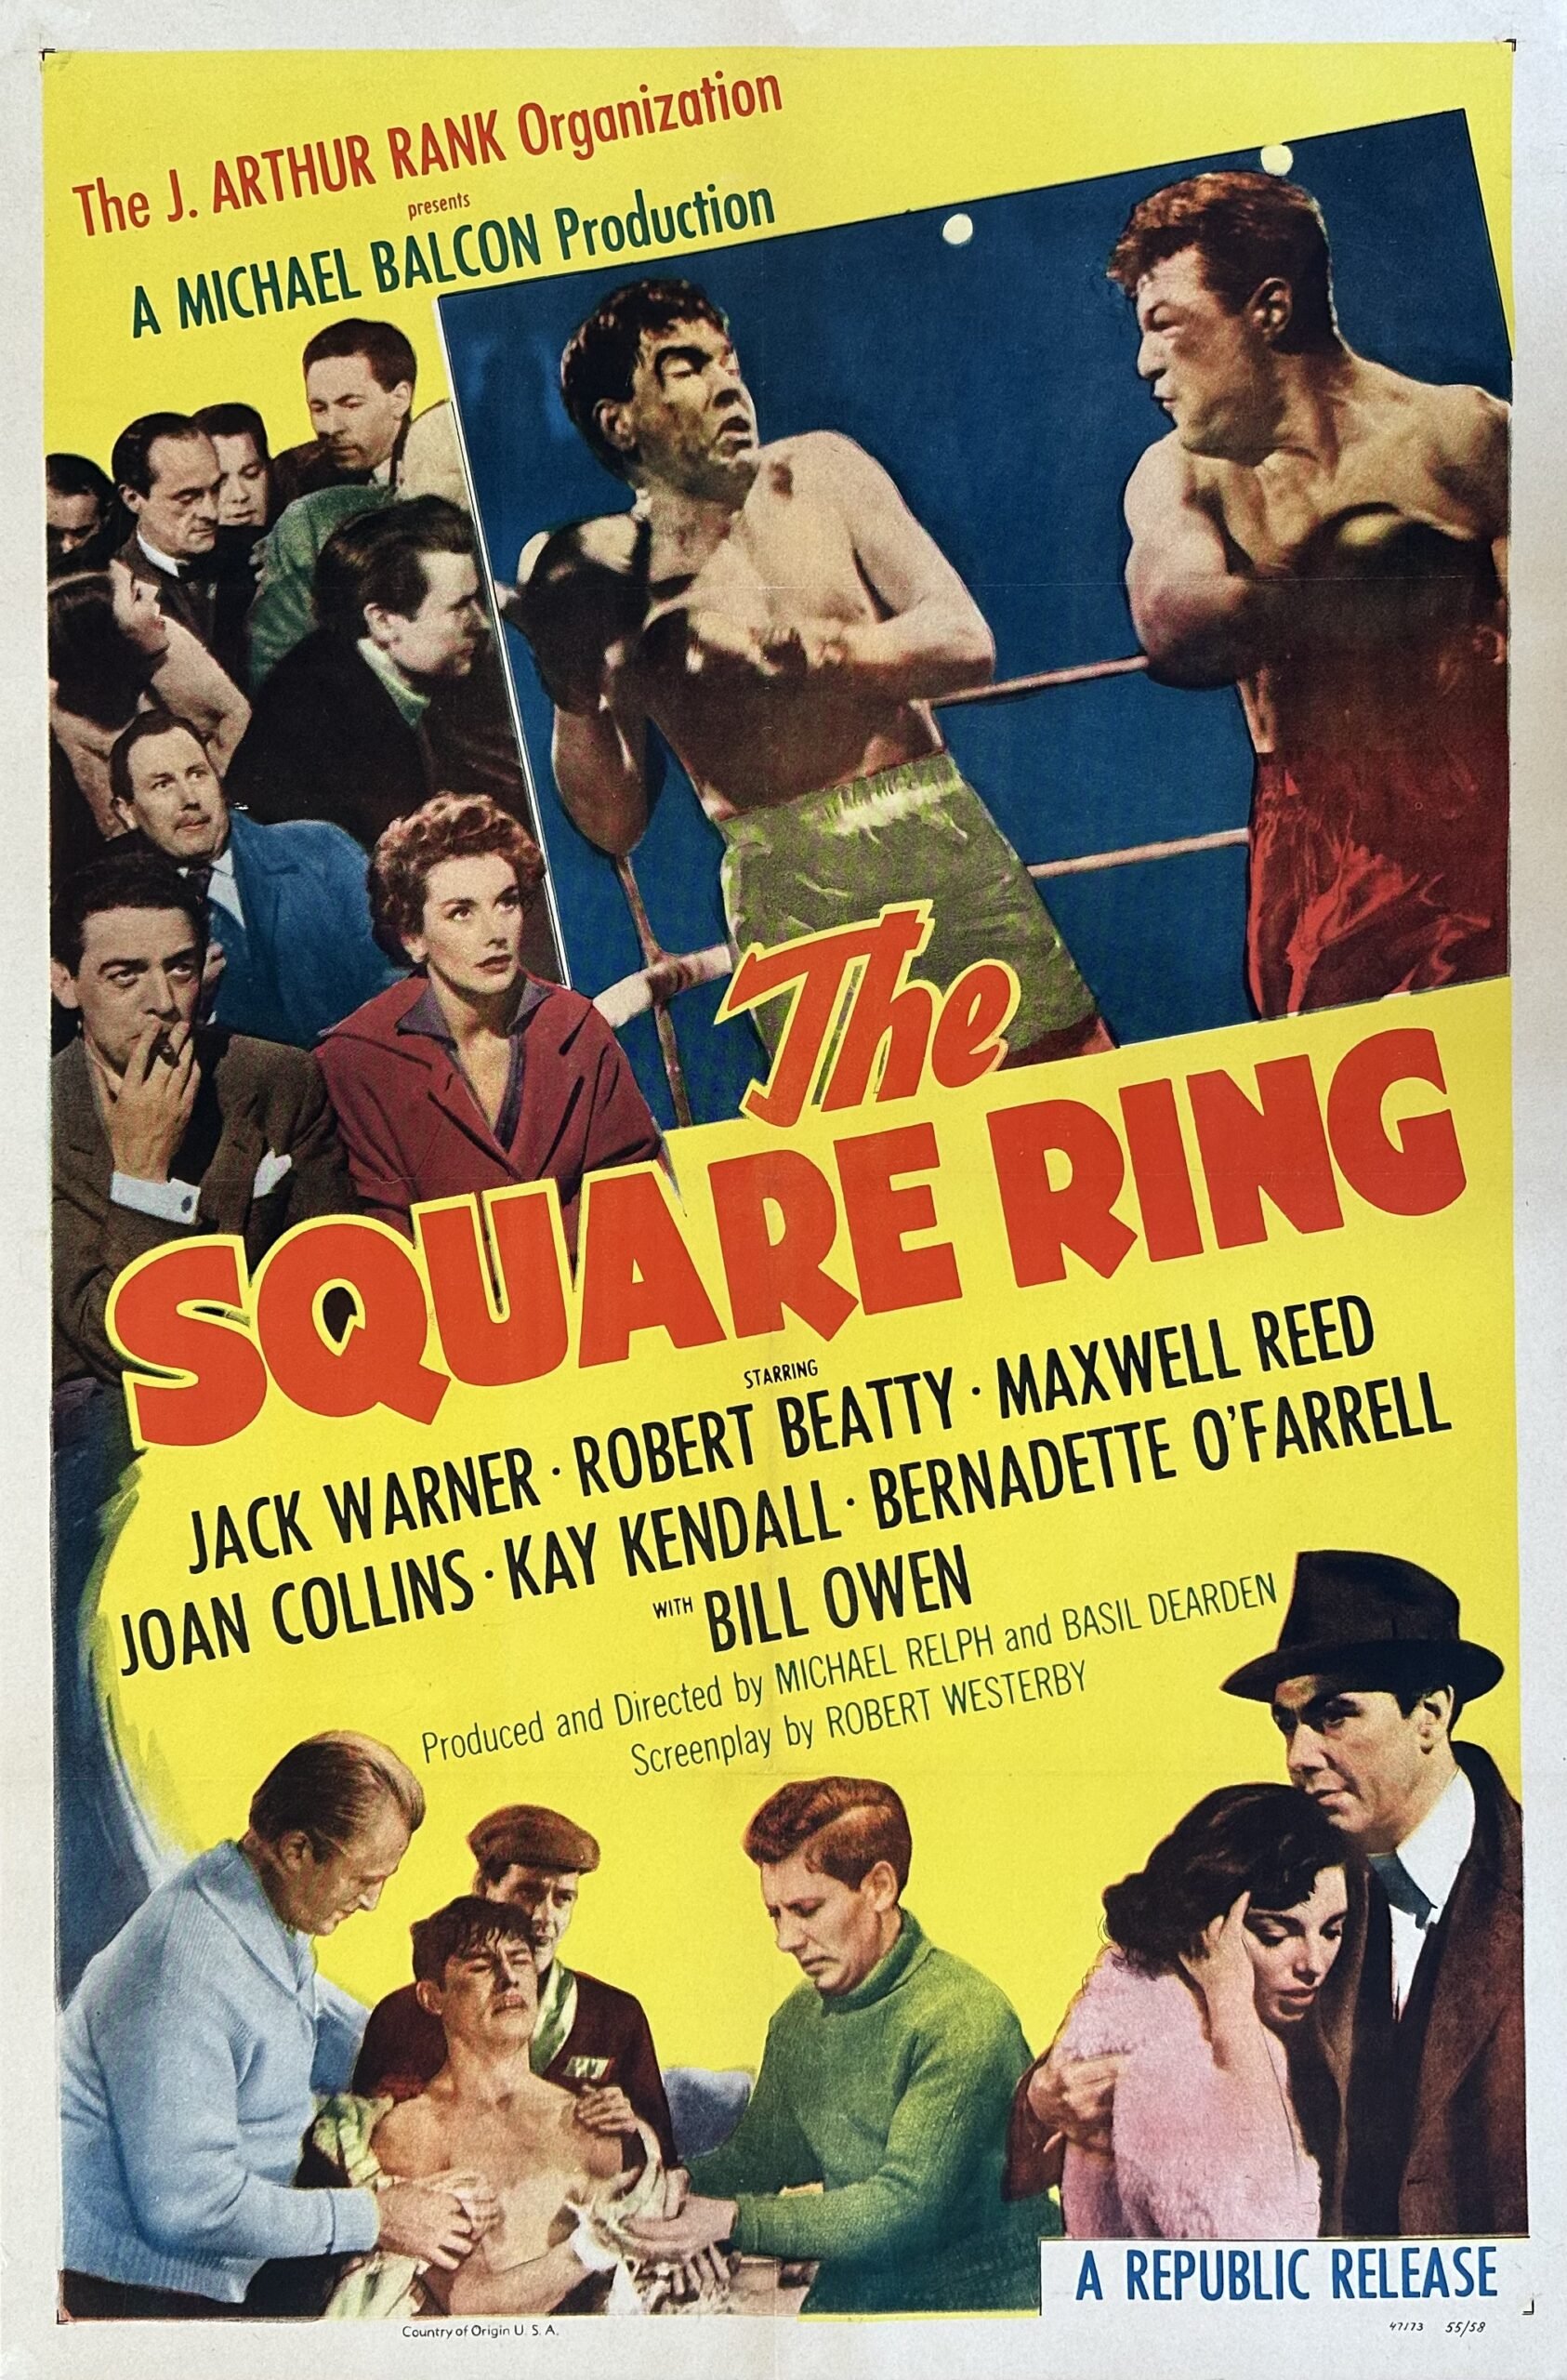 Vintage original US cinema poster for boxing movie, The Square Ring.